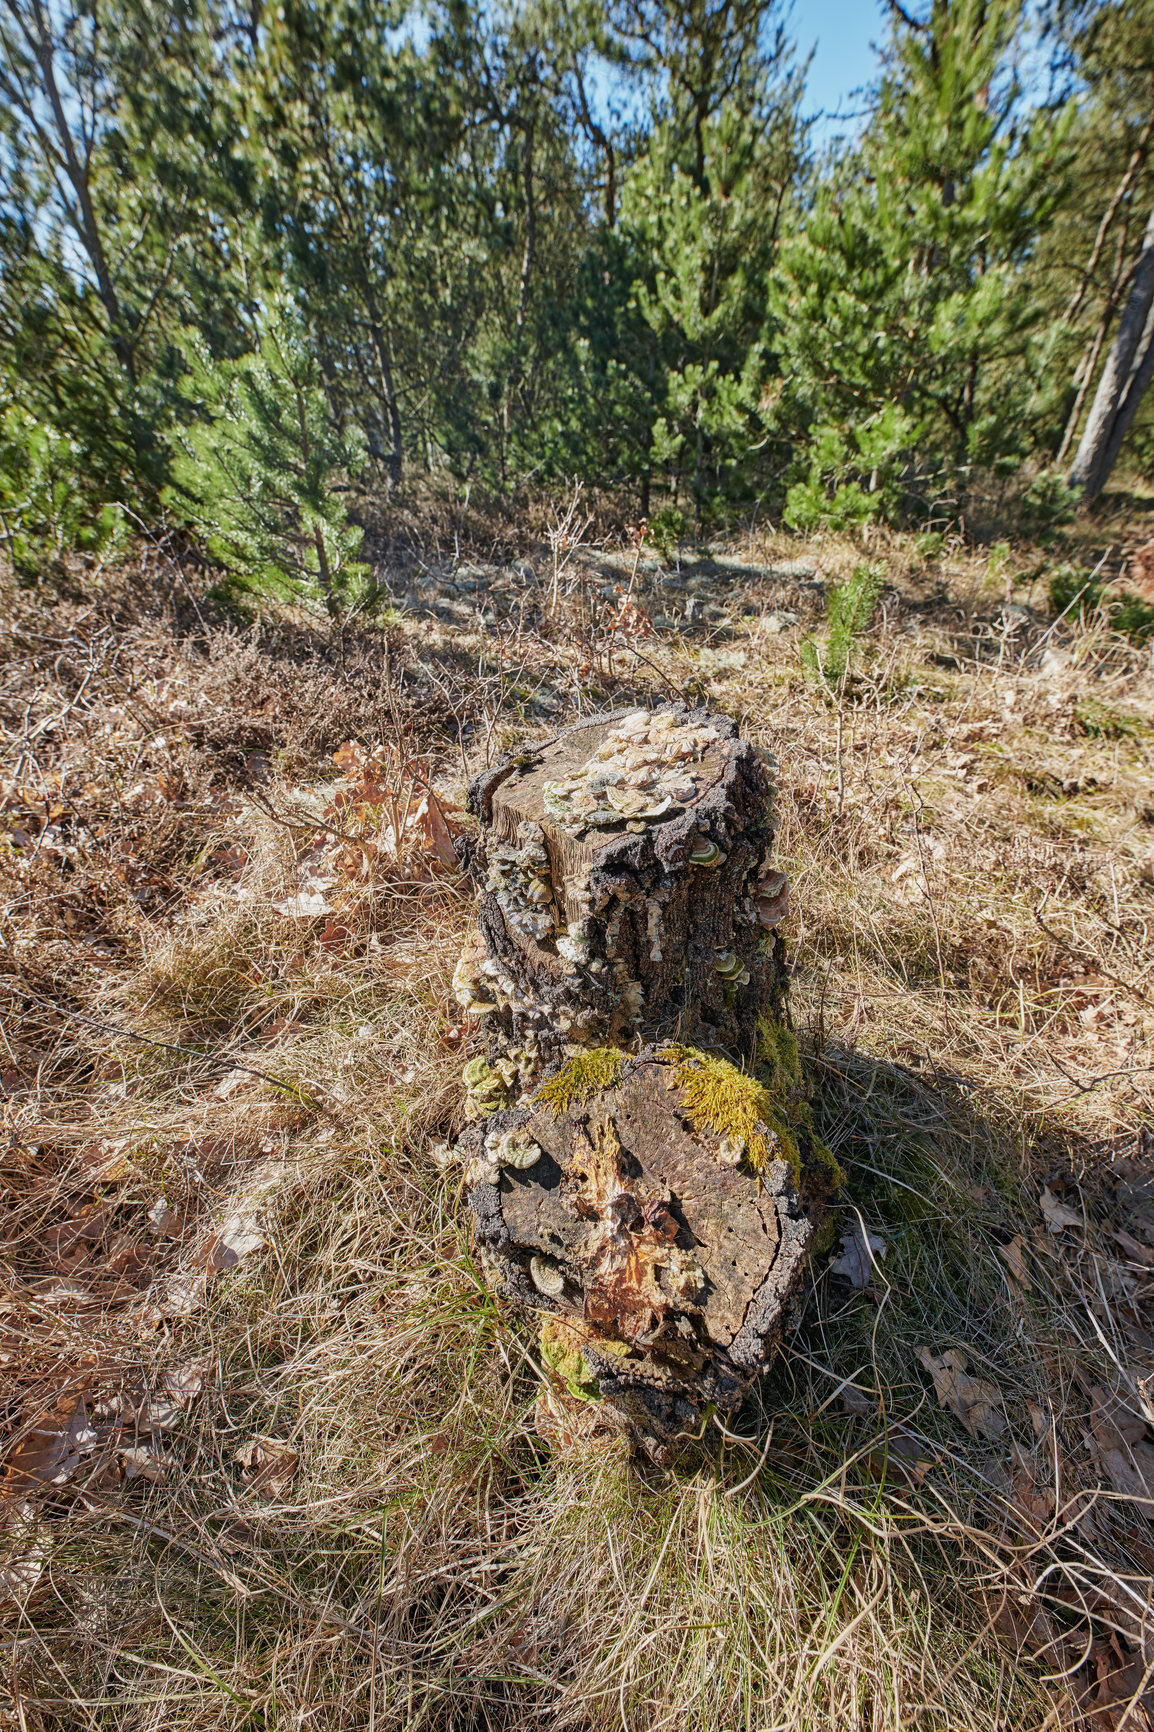 Buy stock photo Closeup view of a moss covered tree stump in an open grass field in the woods. Rural nature scene of overgrown wild reeds with a felled tree in an uninhabited, untouched and uncultivated forest